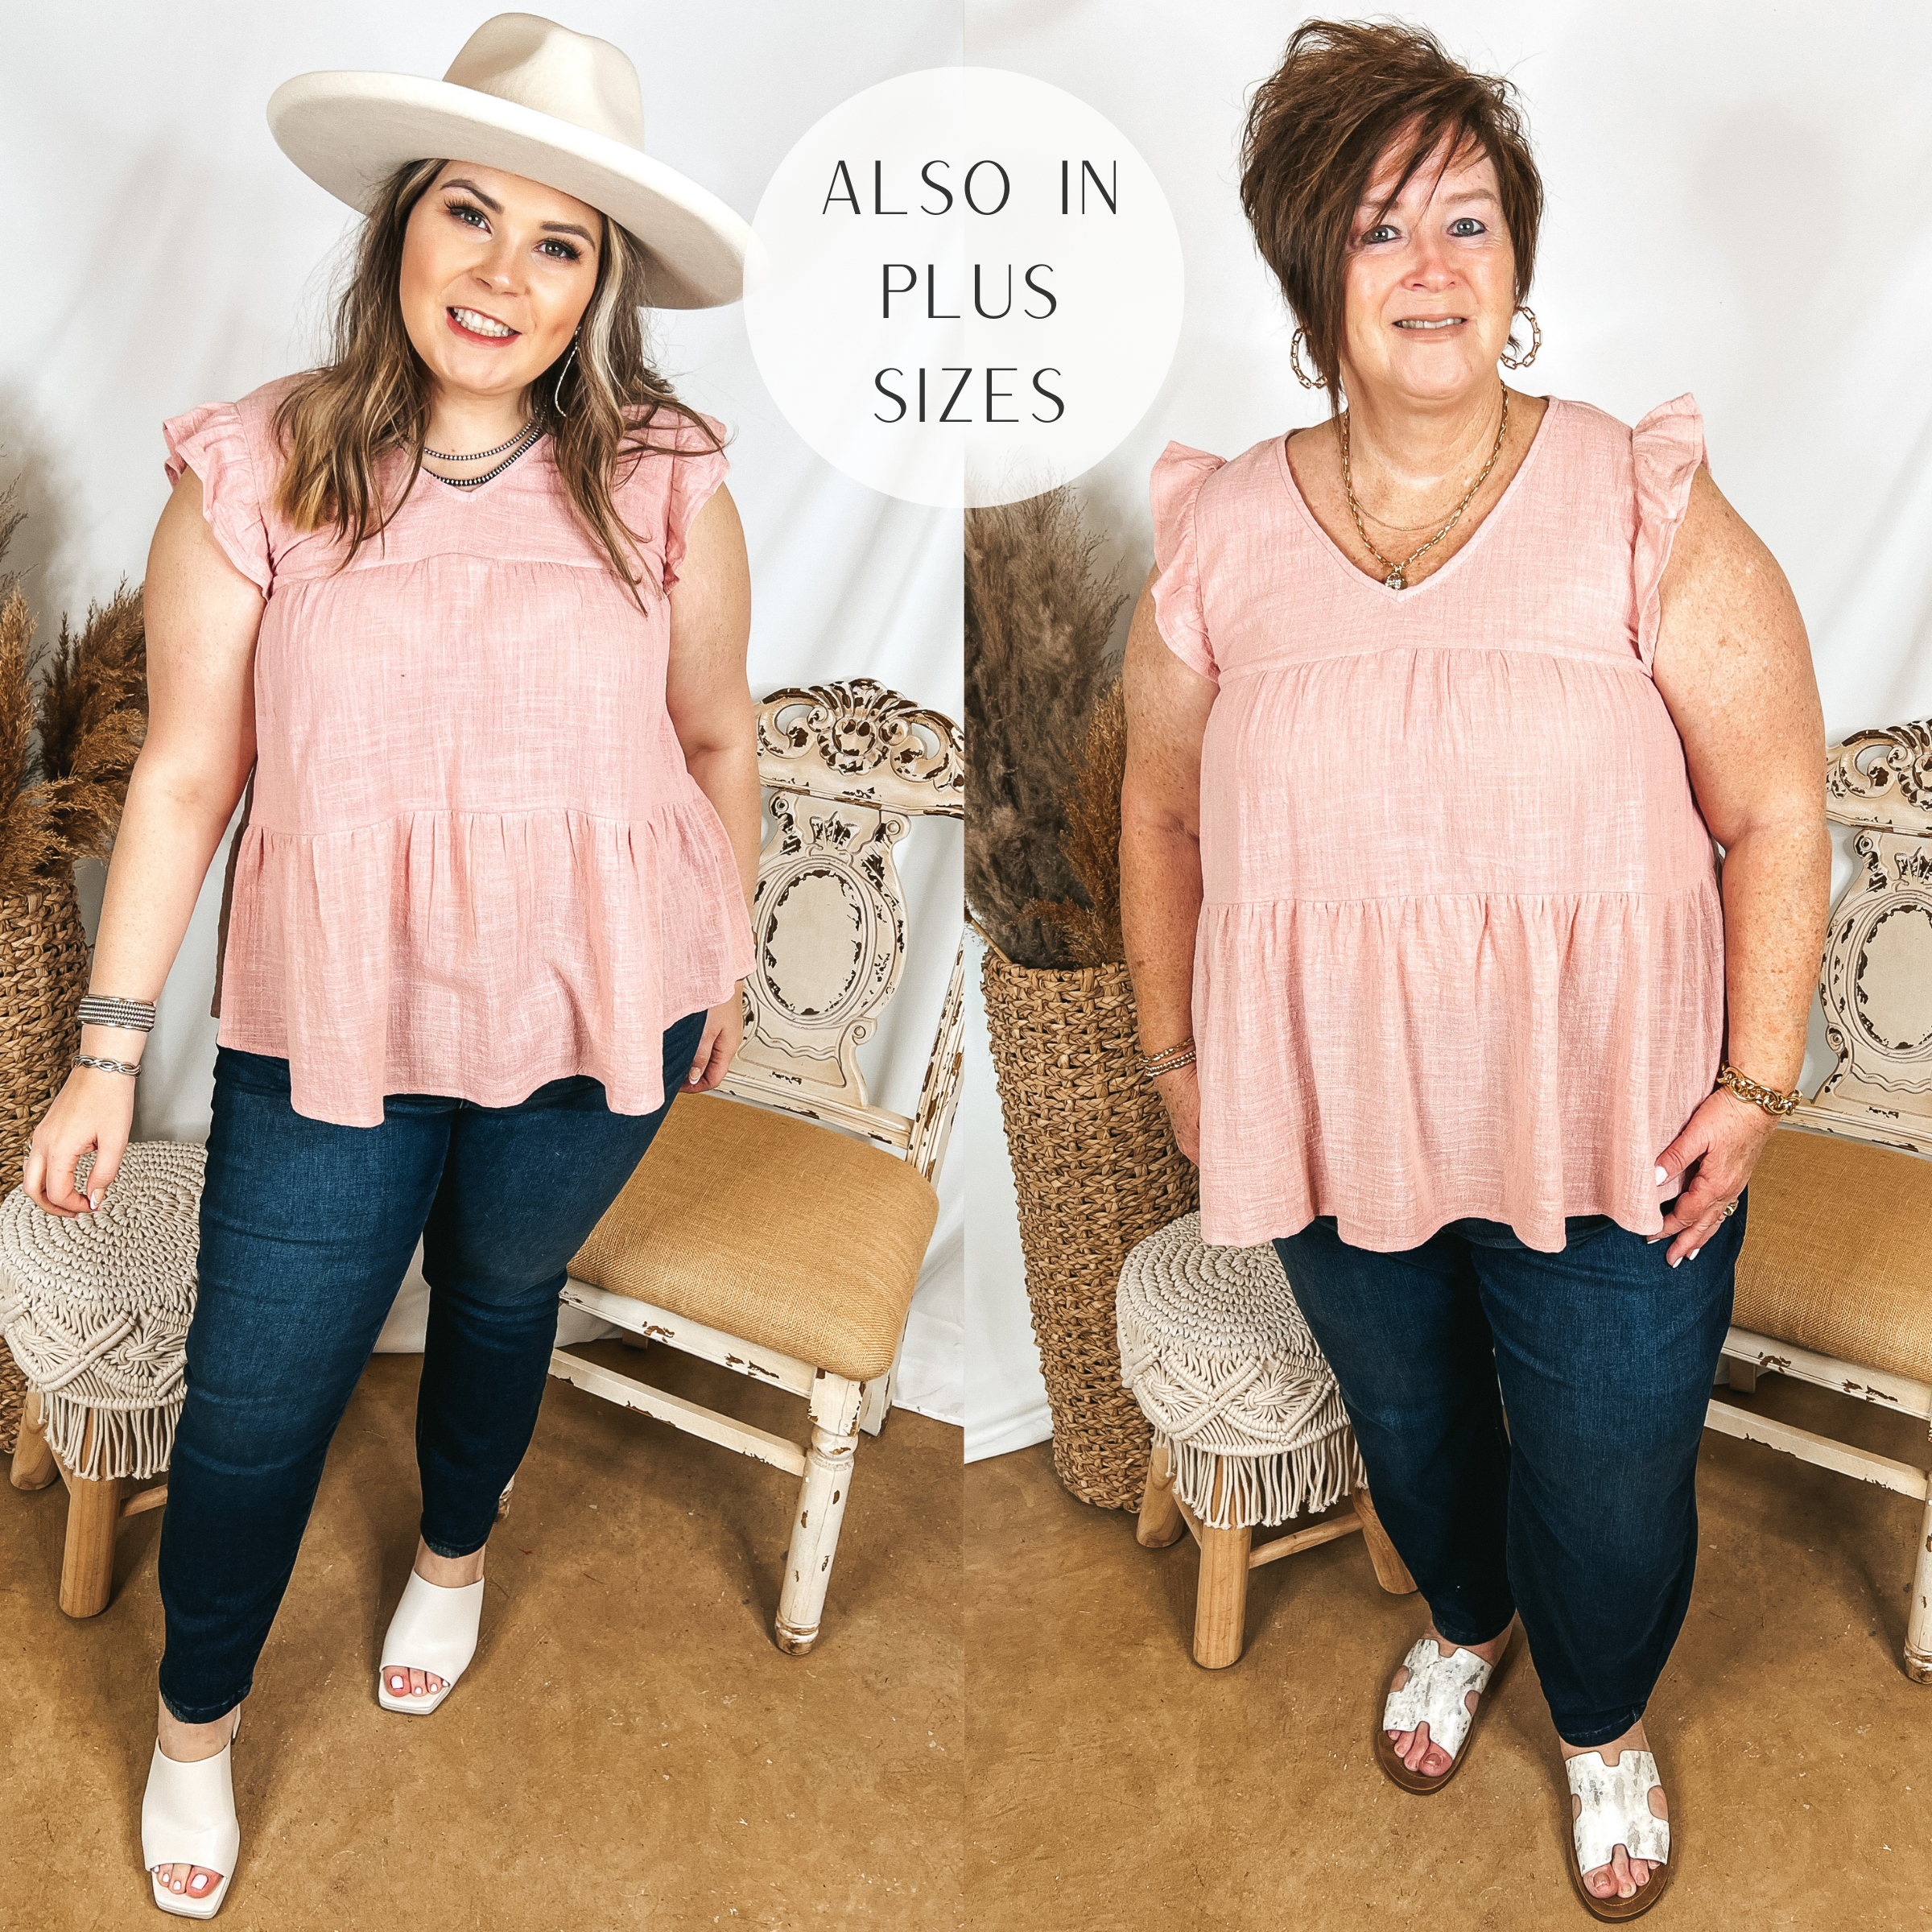 Models are wearing a dusty pink top with ruffle cap sleeves and a tiered body. Both models have it paired with dark wash, non-distressed jeans, white shoes, and jewelry.